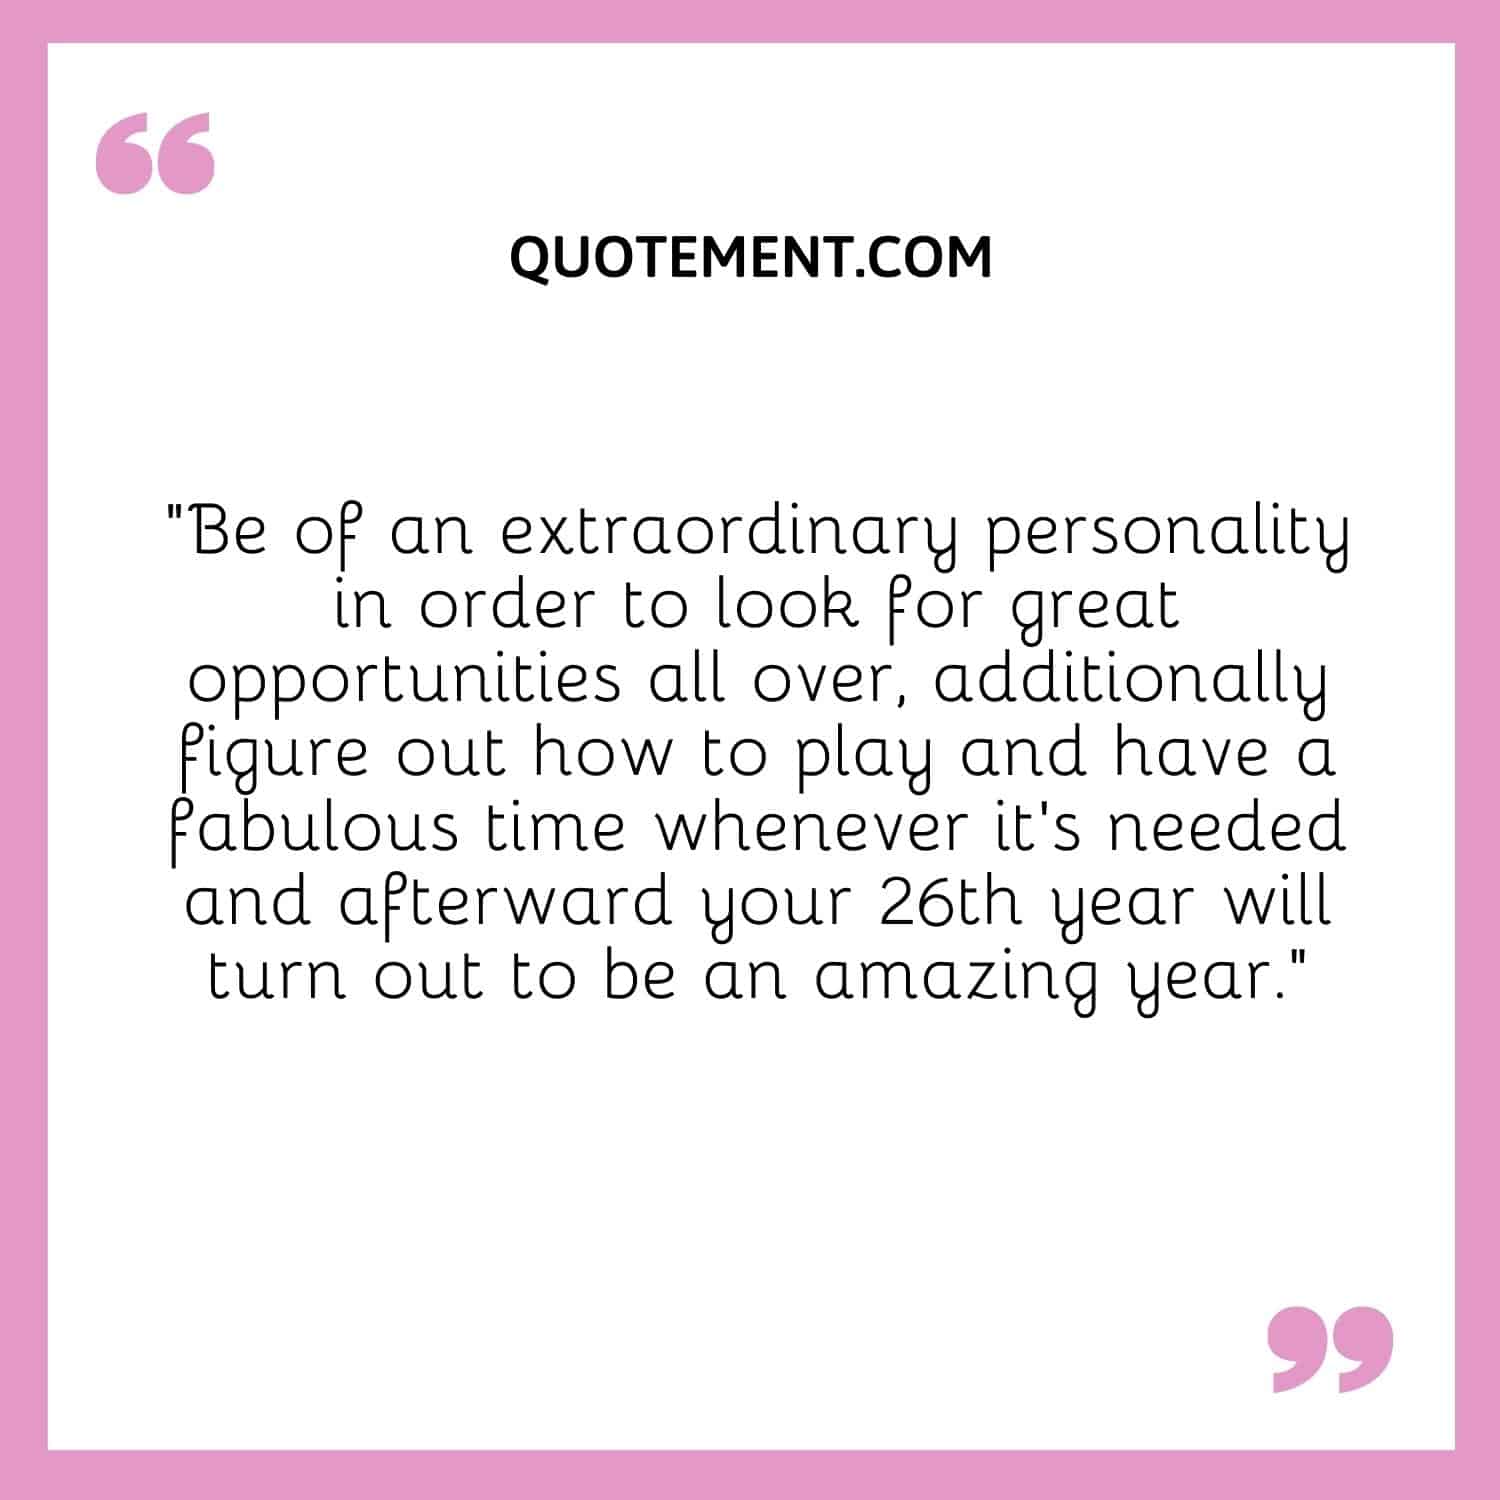 “Be of an extraordinary personality in order to look for great opportunities all over,